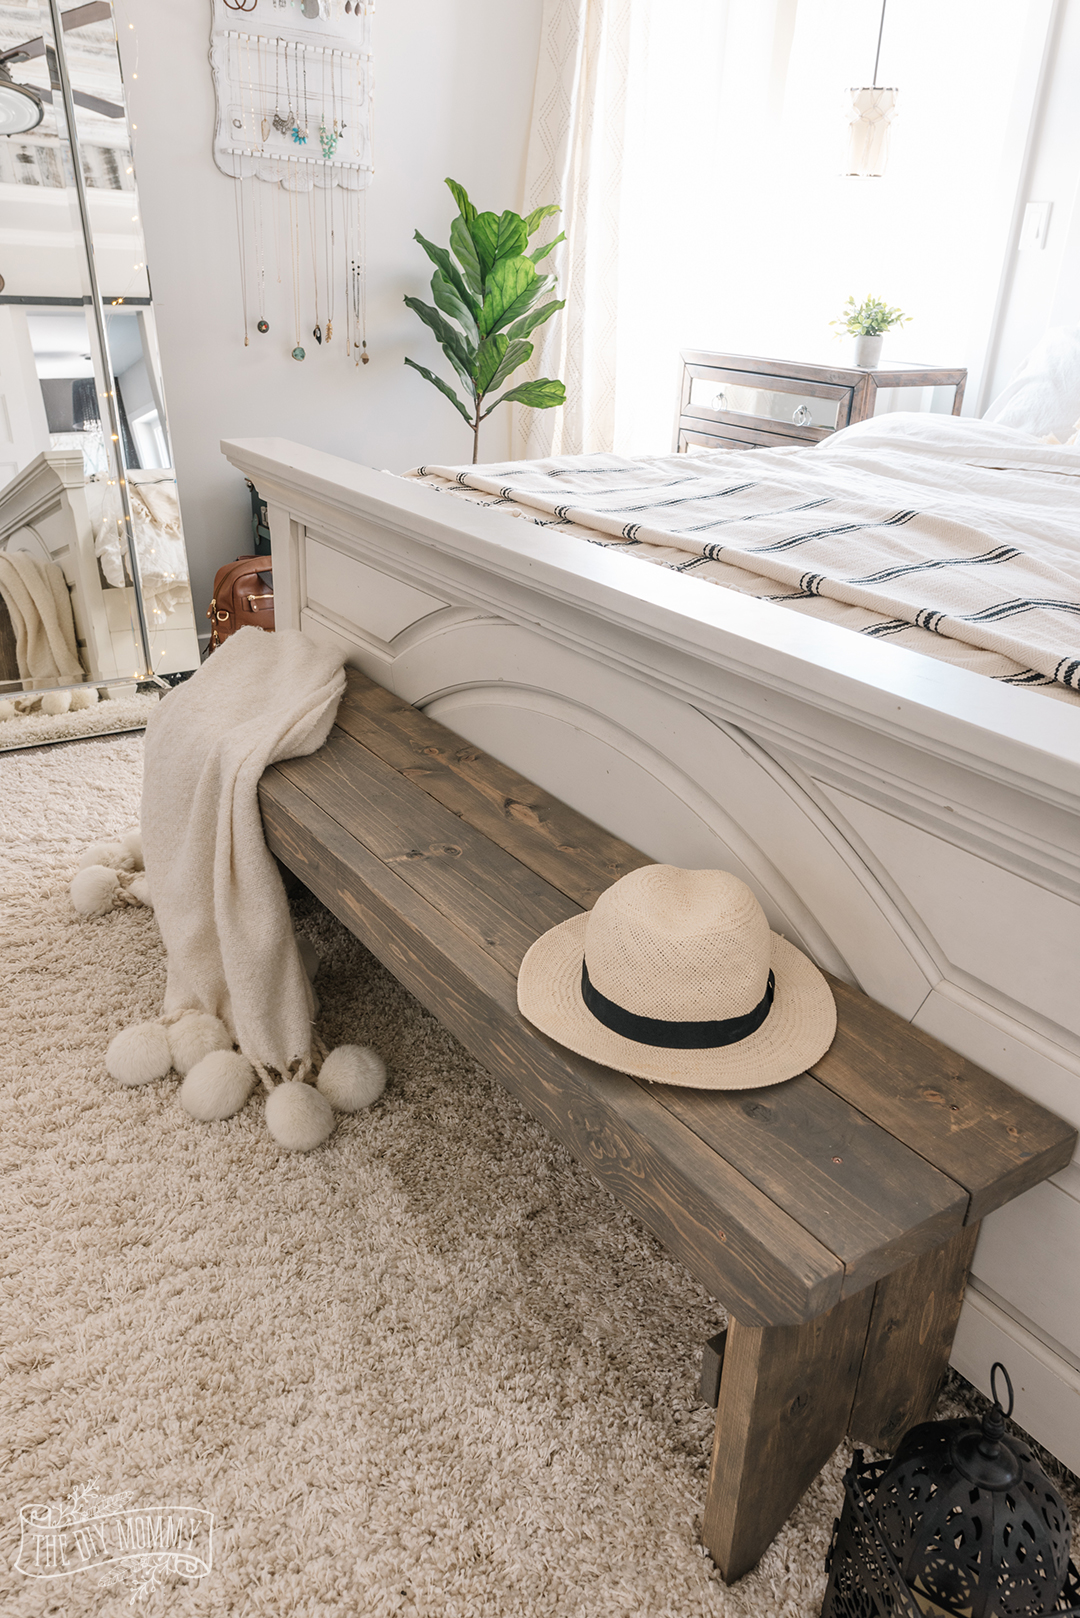 a rustic looking bench made with reclaimed wood makes for great Mother's Day gift ideas